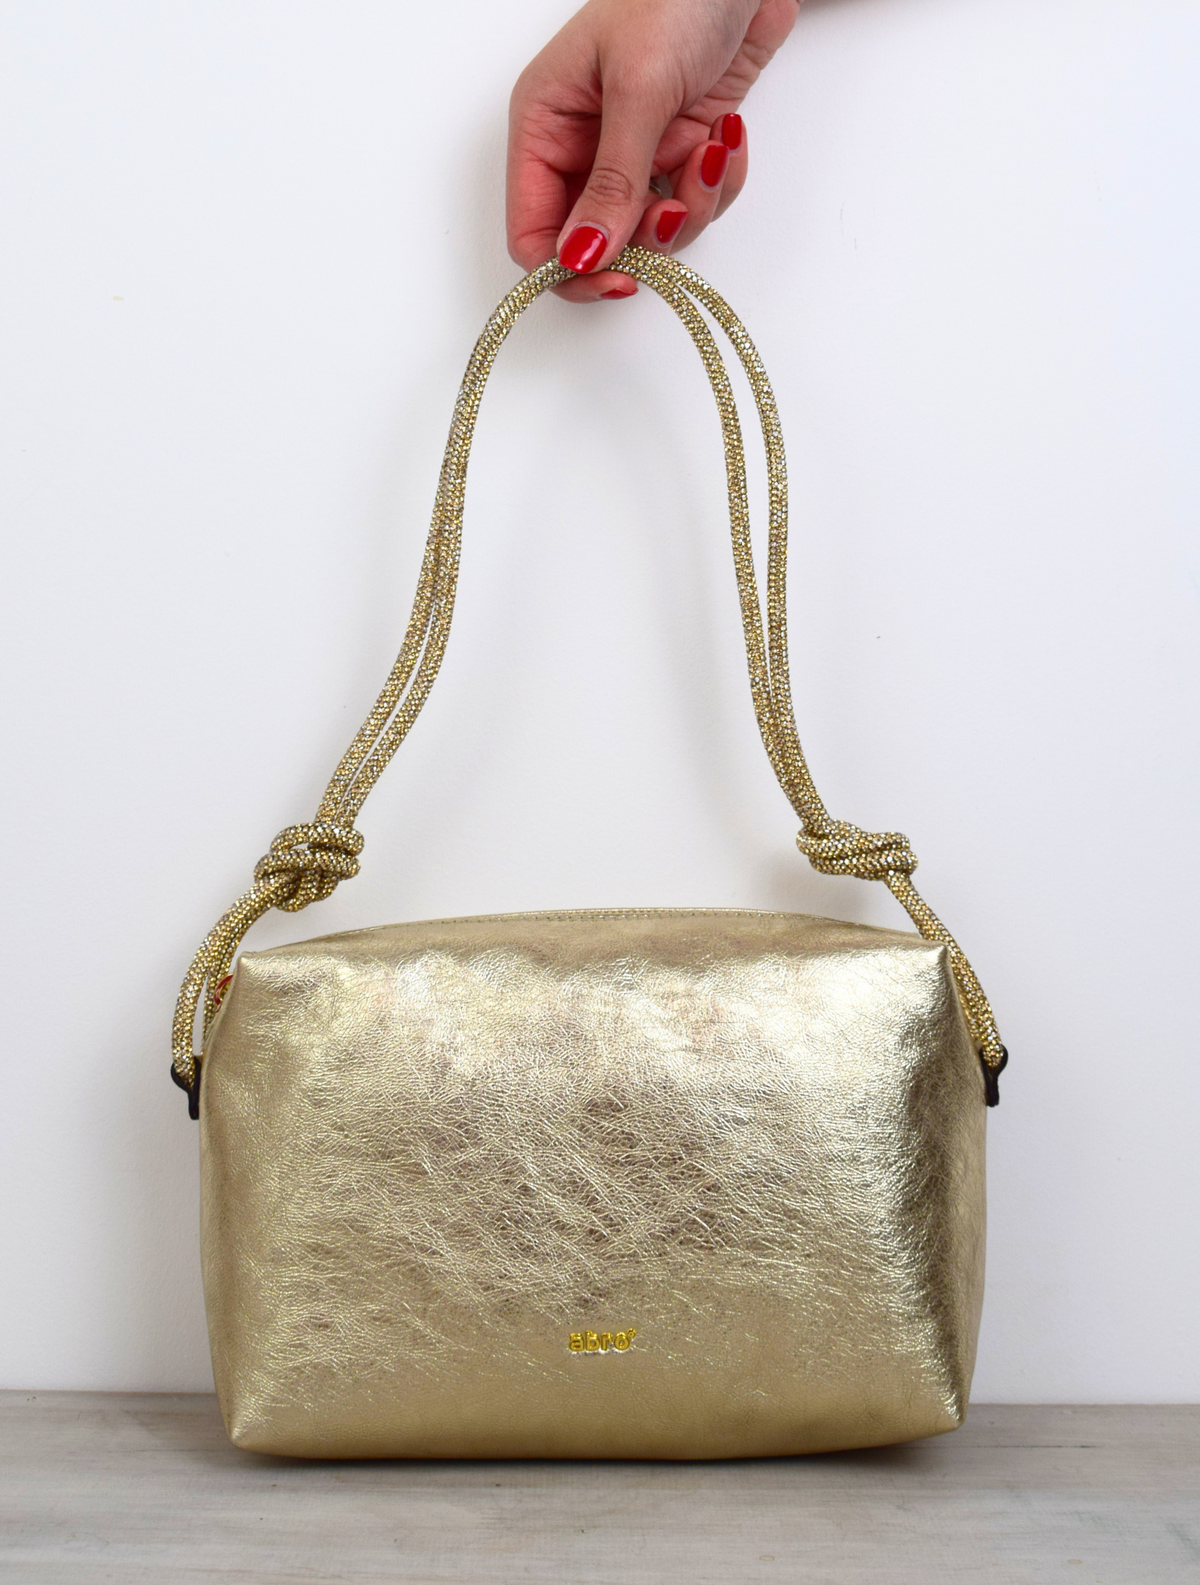 rectangular gold coloured leather bag with sparkly knotted shoulder strap